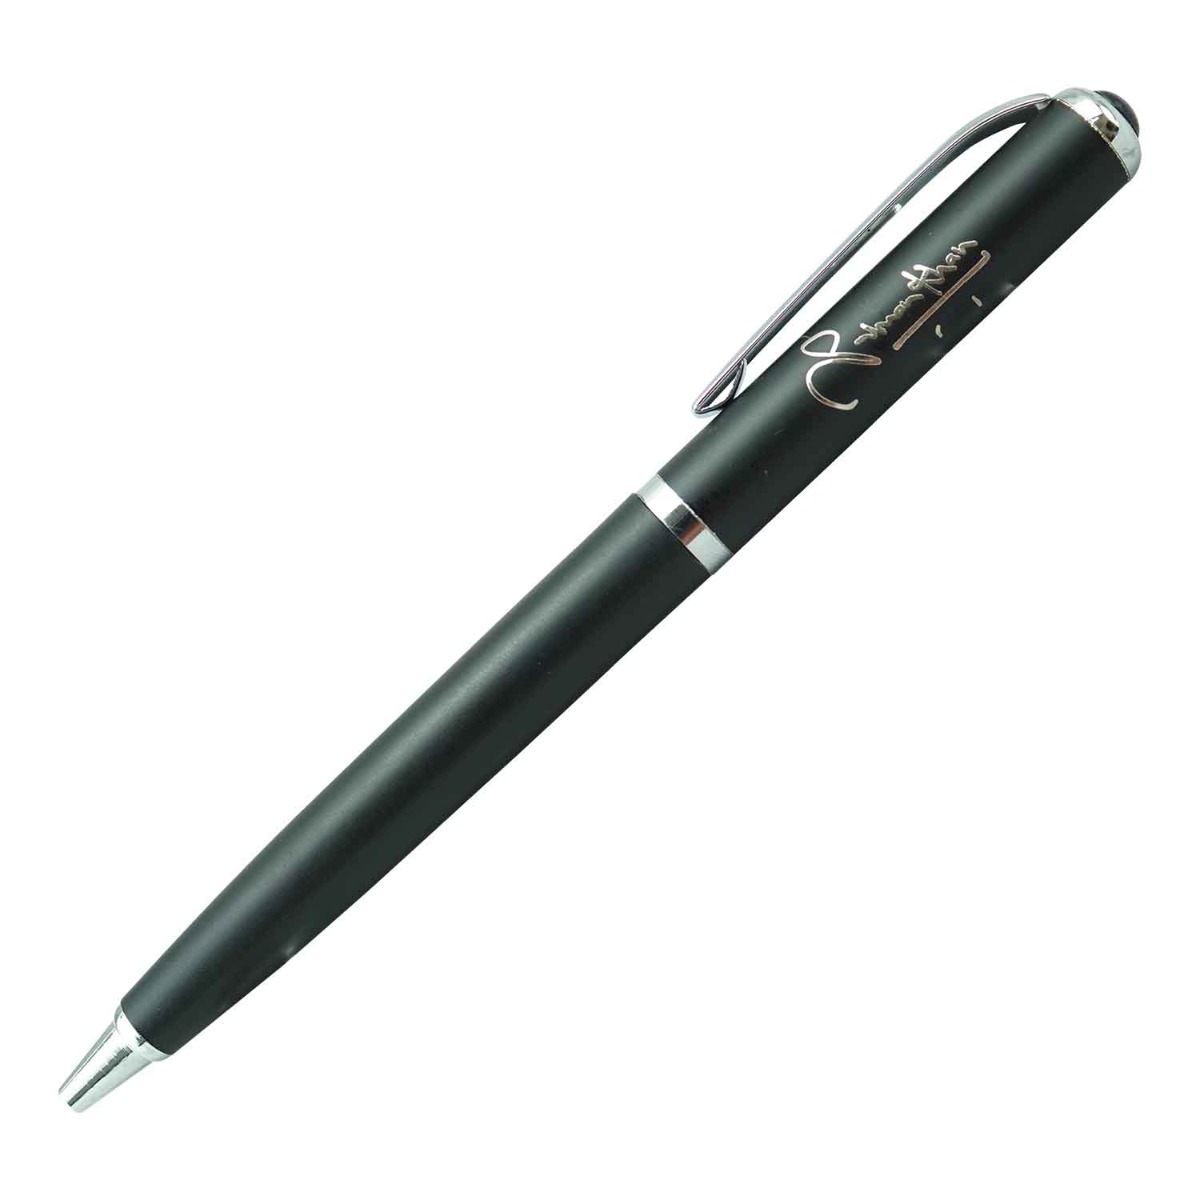 Rotomac Signature Model:15801 Glossy  Finish Black Color Body With Signature Series Silver Clip  Fine Tip  Twist Type Ball Pen - Vintage Pen - New Un-used